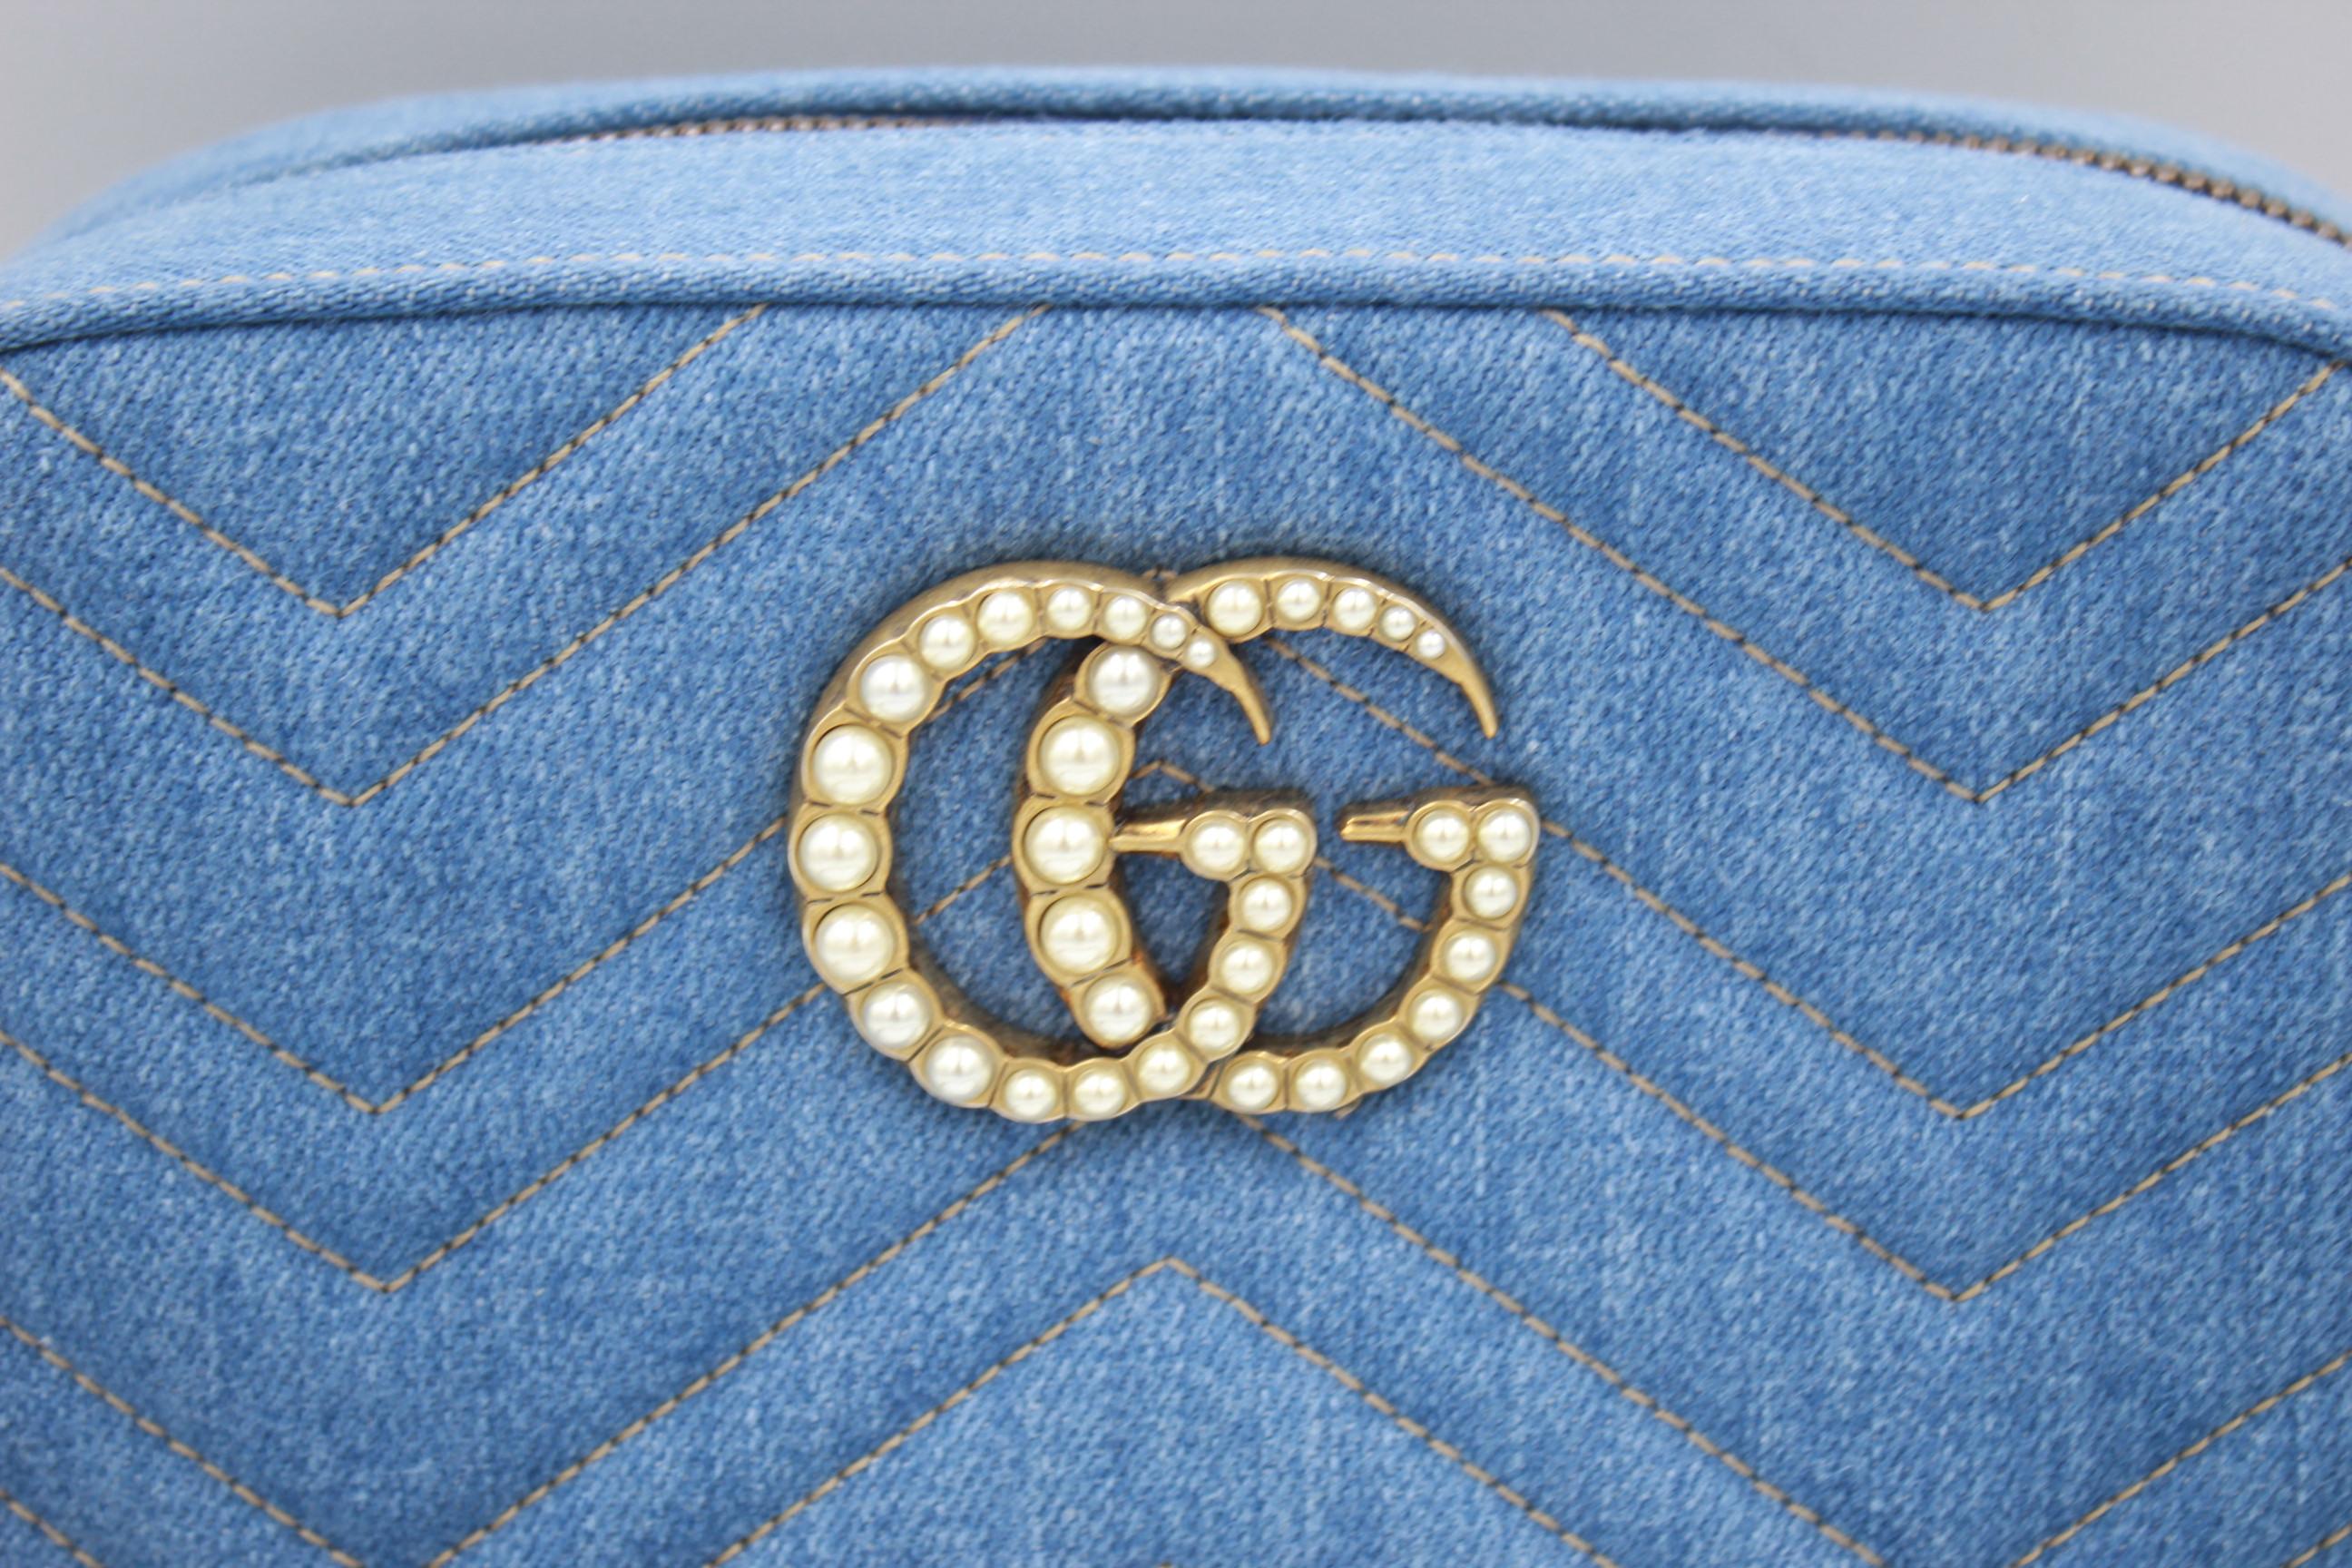 Gucci denim crossbody camera bag with Marmont logo. really good condition almost no sign of wear. Sold with dust bag. Size 25x14